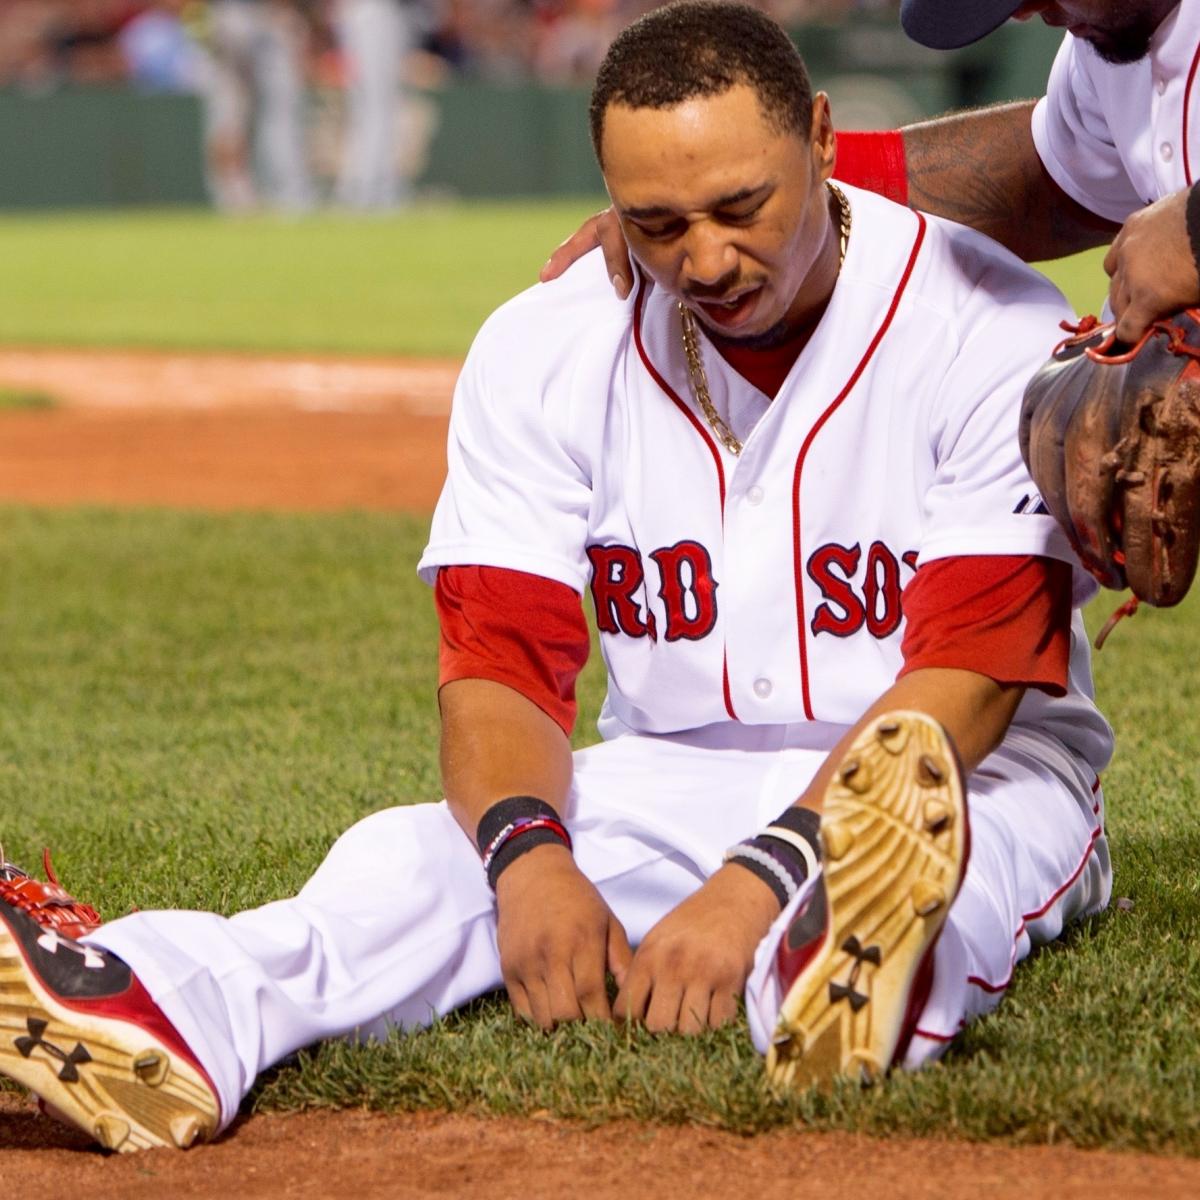 Mookie Betts injury: Boston Red Sox star not playing because of